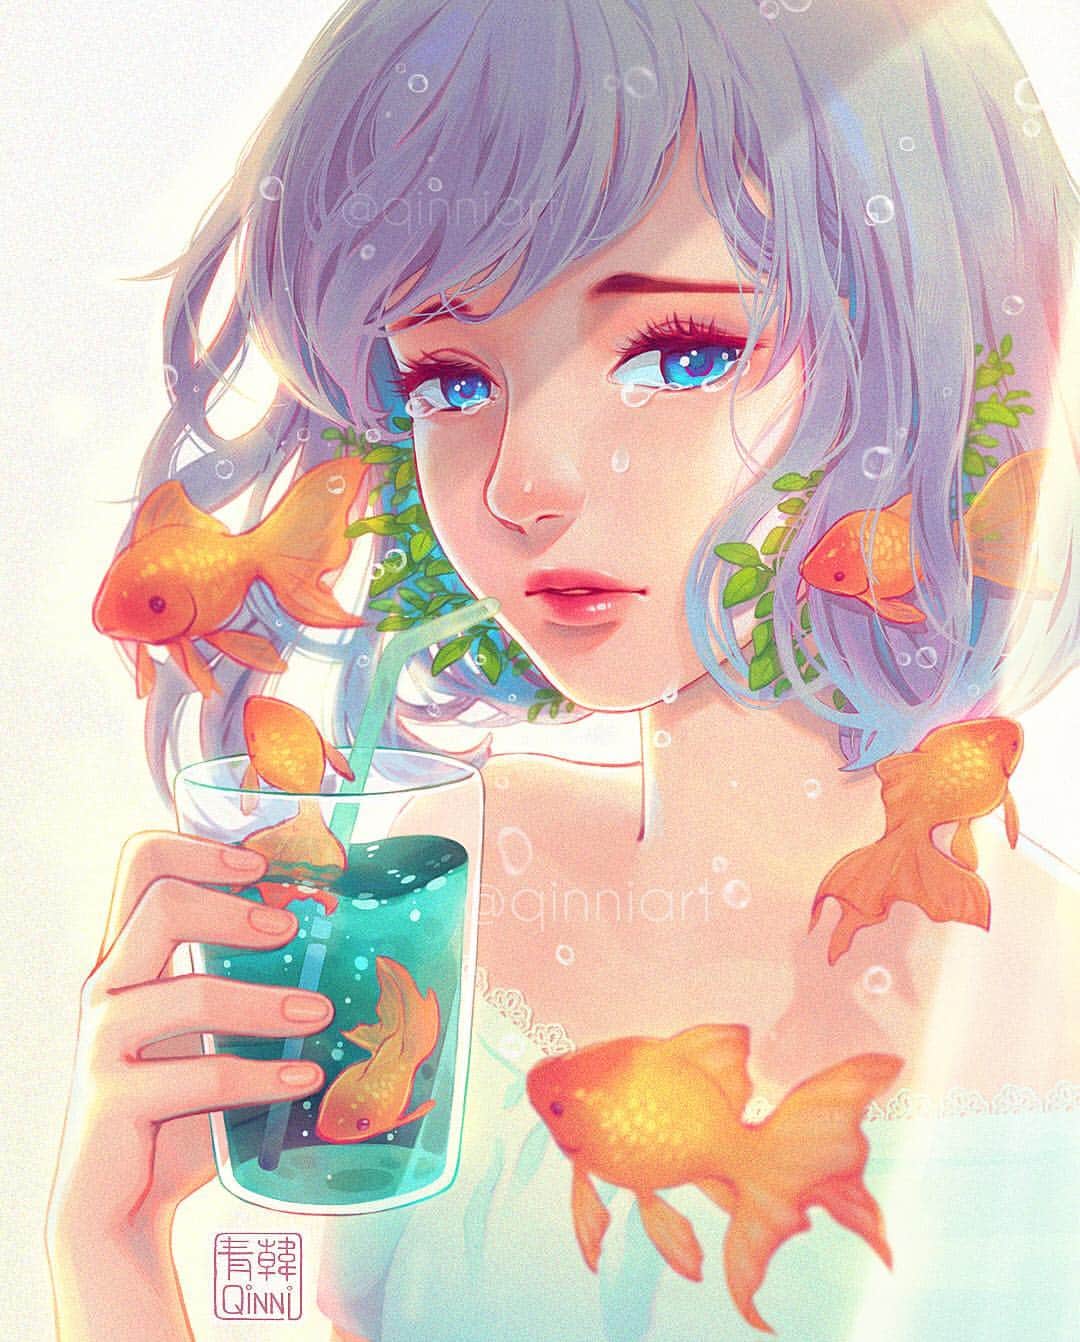 Qing Hanのインスタグラム：「🌿🐠🐠 The sunny weather outside doesn't match my mood...hahaha... • • Just some rambling as usual, feel free to ignore me hahaha. sorry I haven't really been posting much... I've been a little stressed. No surprises there haha. The doctors don't know what to do with me or my heart disease, I'm not getting call backs even after doing tests, but most of all as time goes on I feel more and more useless and like...a waste of space...? It's just this feeling of guilt, inadequacy of not being able to do anything to help anyone or even earn a decent living, instead living off my parents because I'm too sick and stressed and busy with rehab stuff to work right now. It doesn't help that my mom's injured her arm and was diagnosed with low white blood cell (low immune system) a few weeks ago...we're like two sick ppl taking care of each other lmao "orz so yah I've been avoiding social media a bit...I drew this one thing that started off nice and sunny and as my mood worsened it turned sad 😂. I was randomly bursting into tears and shit, and that's not fun lol... I'm so tired. Thanks for all your support and kind words though....but I'm so tired...of just, like, everything hahaha... Sorry, rambled again lmaooo you guys must be super tired of reading these depressing-ish shit lmaooo sry, I don't mean to do it but there aren't a lot of ppl I can talk to about this stuff, especially not my family cause it stresses them out lolll~ though if this stressed you out I'm sorrryyyy haha @-@;;; umm thanks for making it this far lol this is a true ramble. Here's a cookie. Wait, it's summer, so here's some ice cream 🍦😆 • • • #illustration #goldfish #summer #mood #procreate」